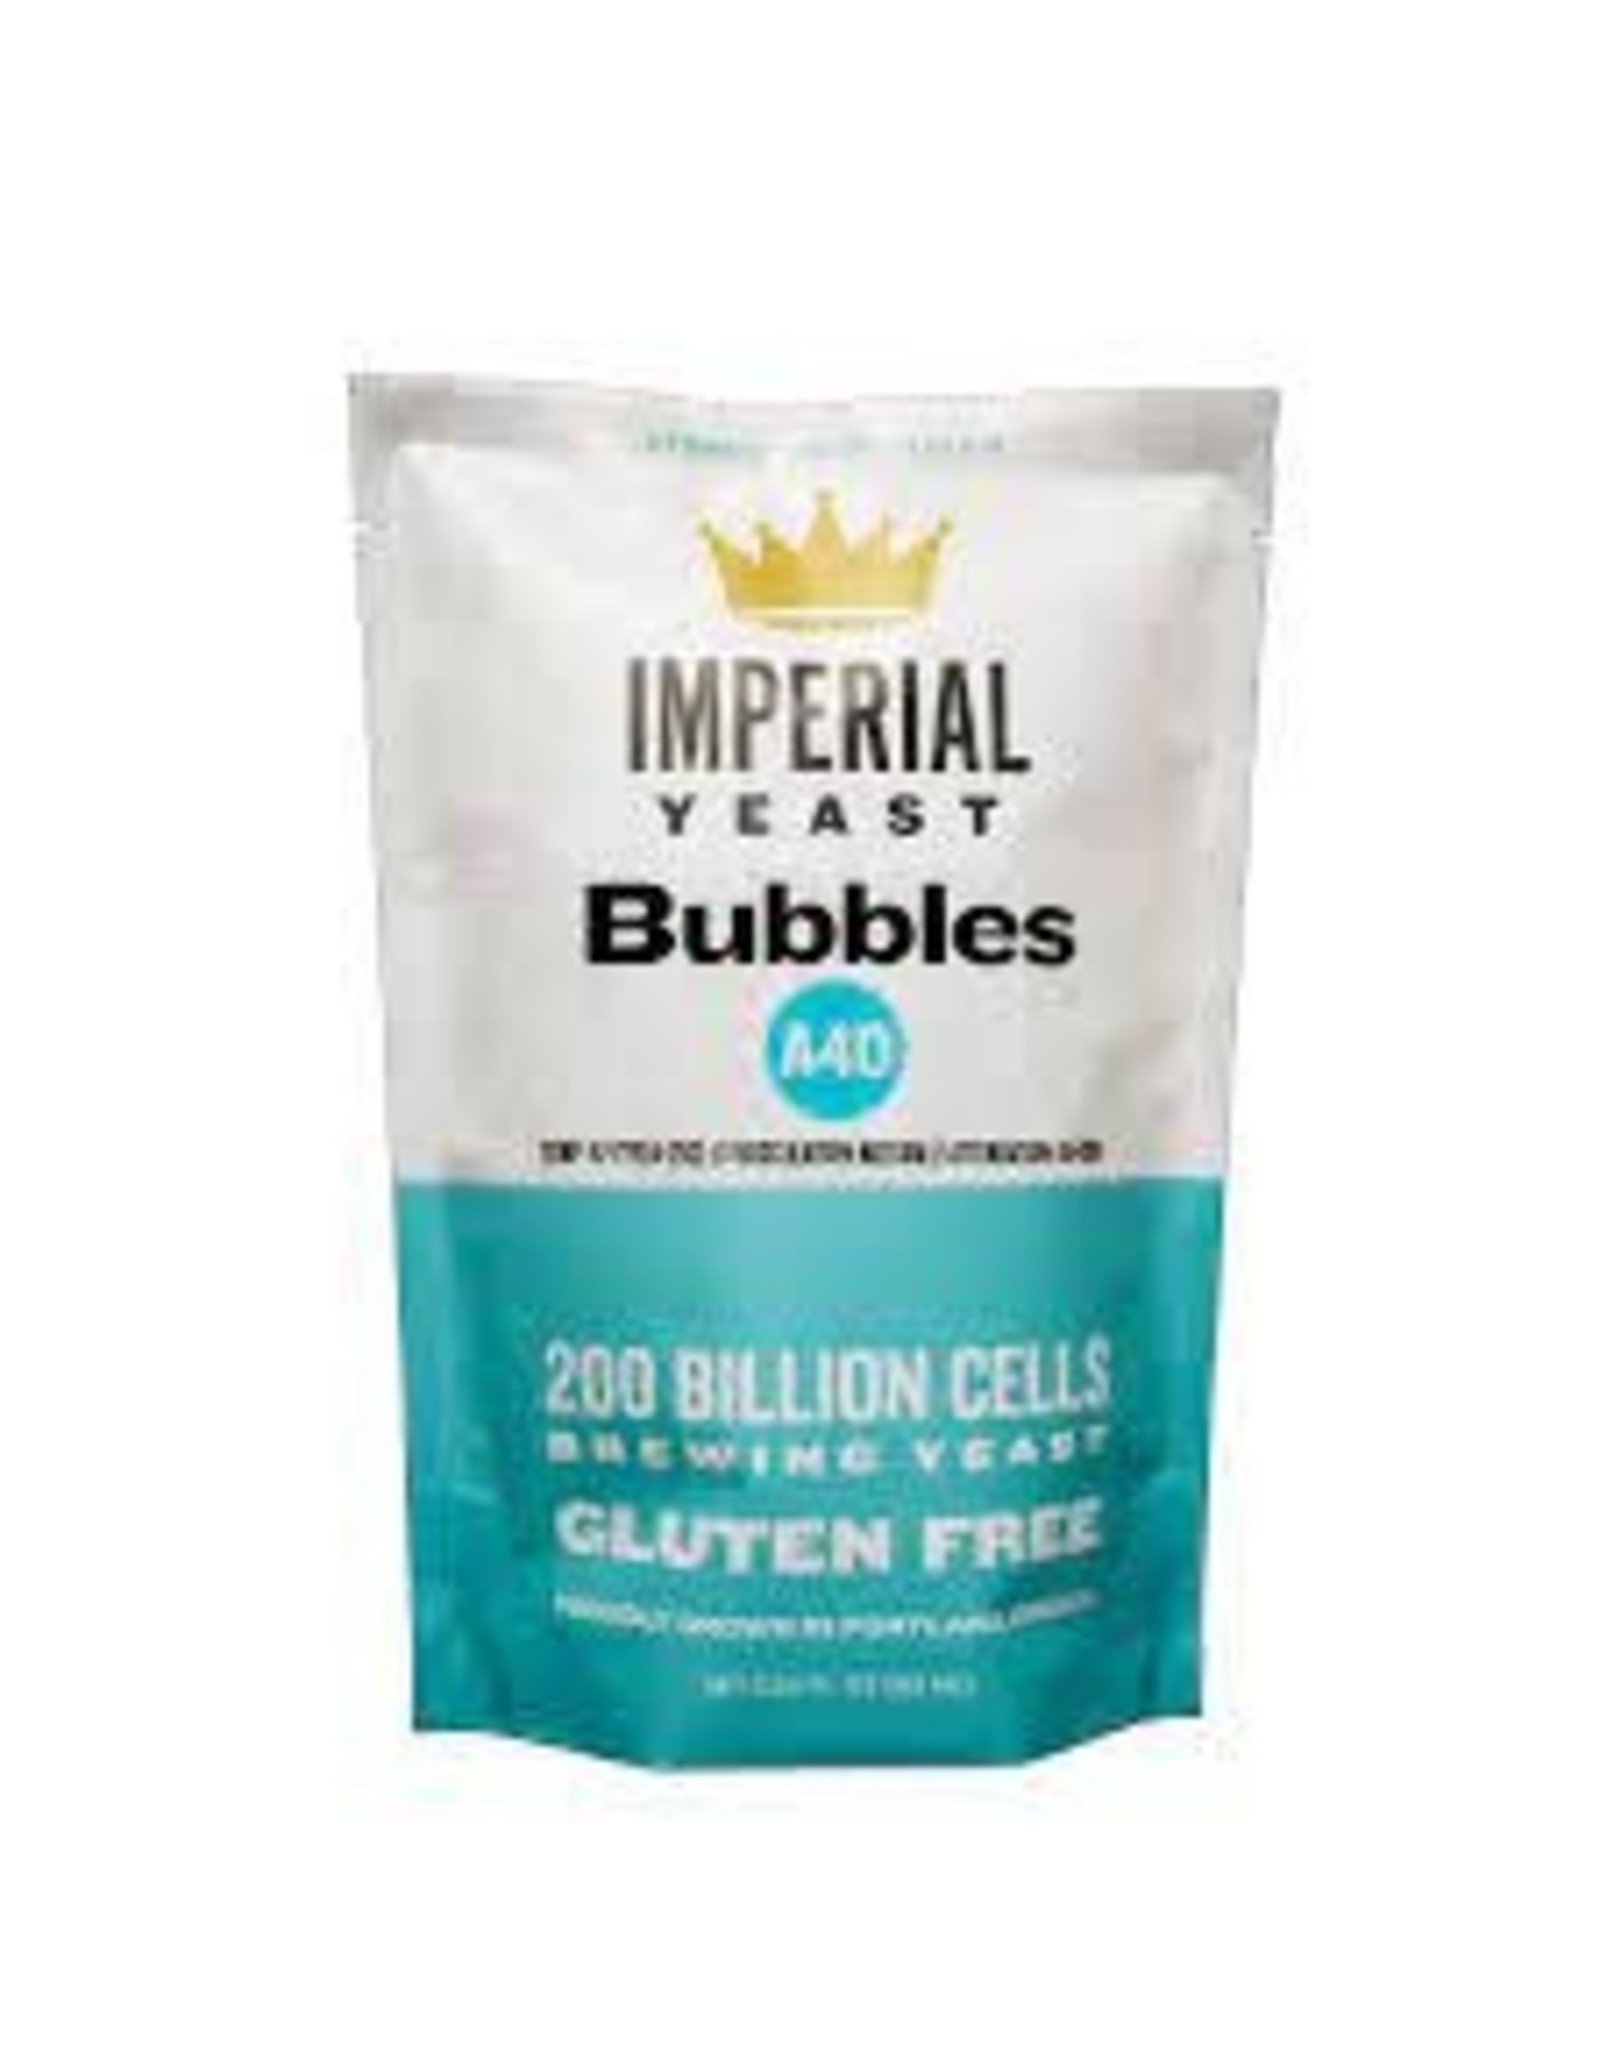 IMPERIAL YEAST IMPERIAL A40 BUBBLES